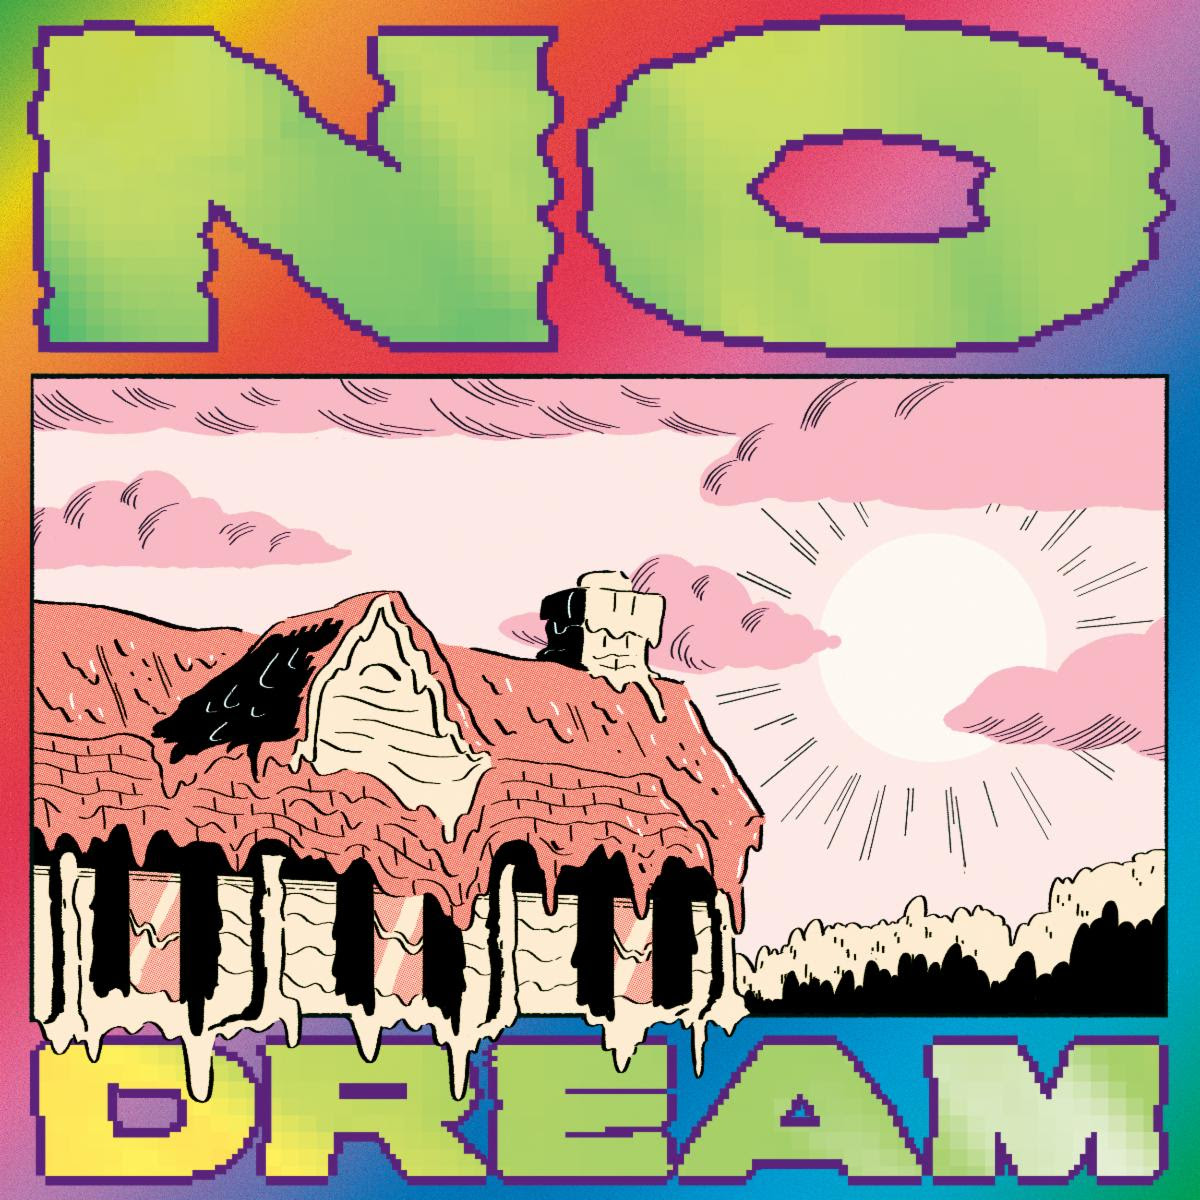 Jeff Rosenstock shares his fourth full-length album No Dream today. The LP is out now on Polyvinyl Record Co., and is available for free download via